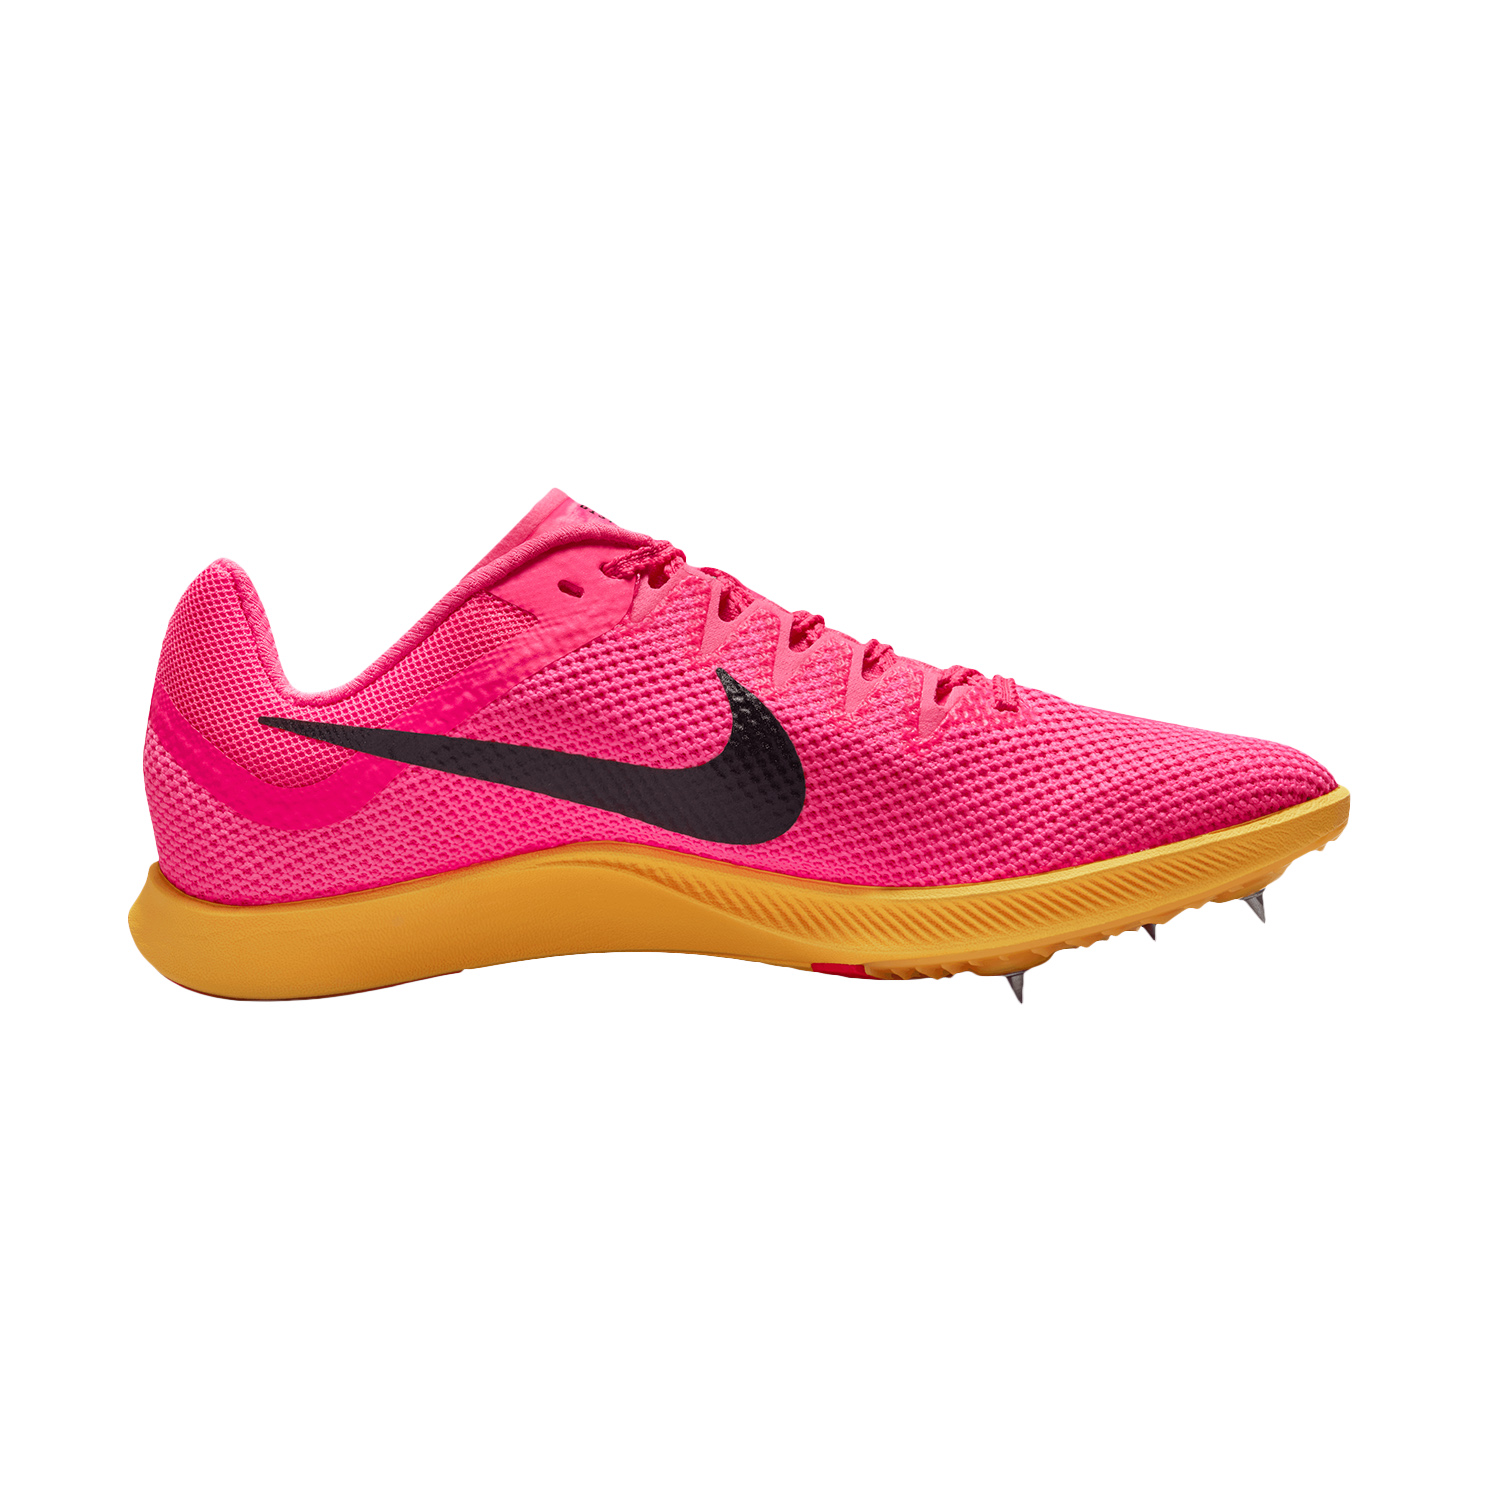 NIKE RIVAL DISTANCE - MisterRunning